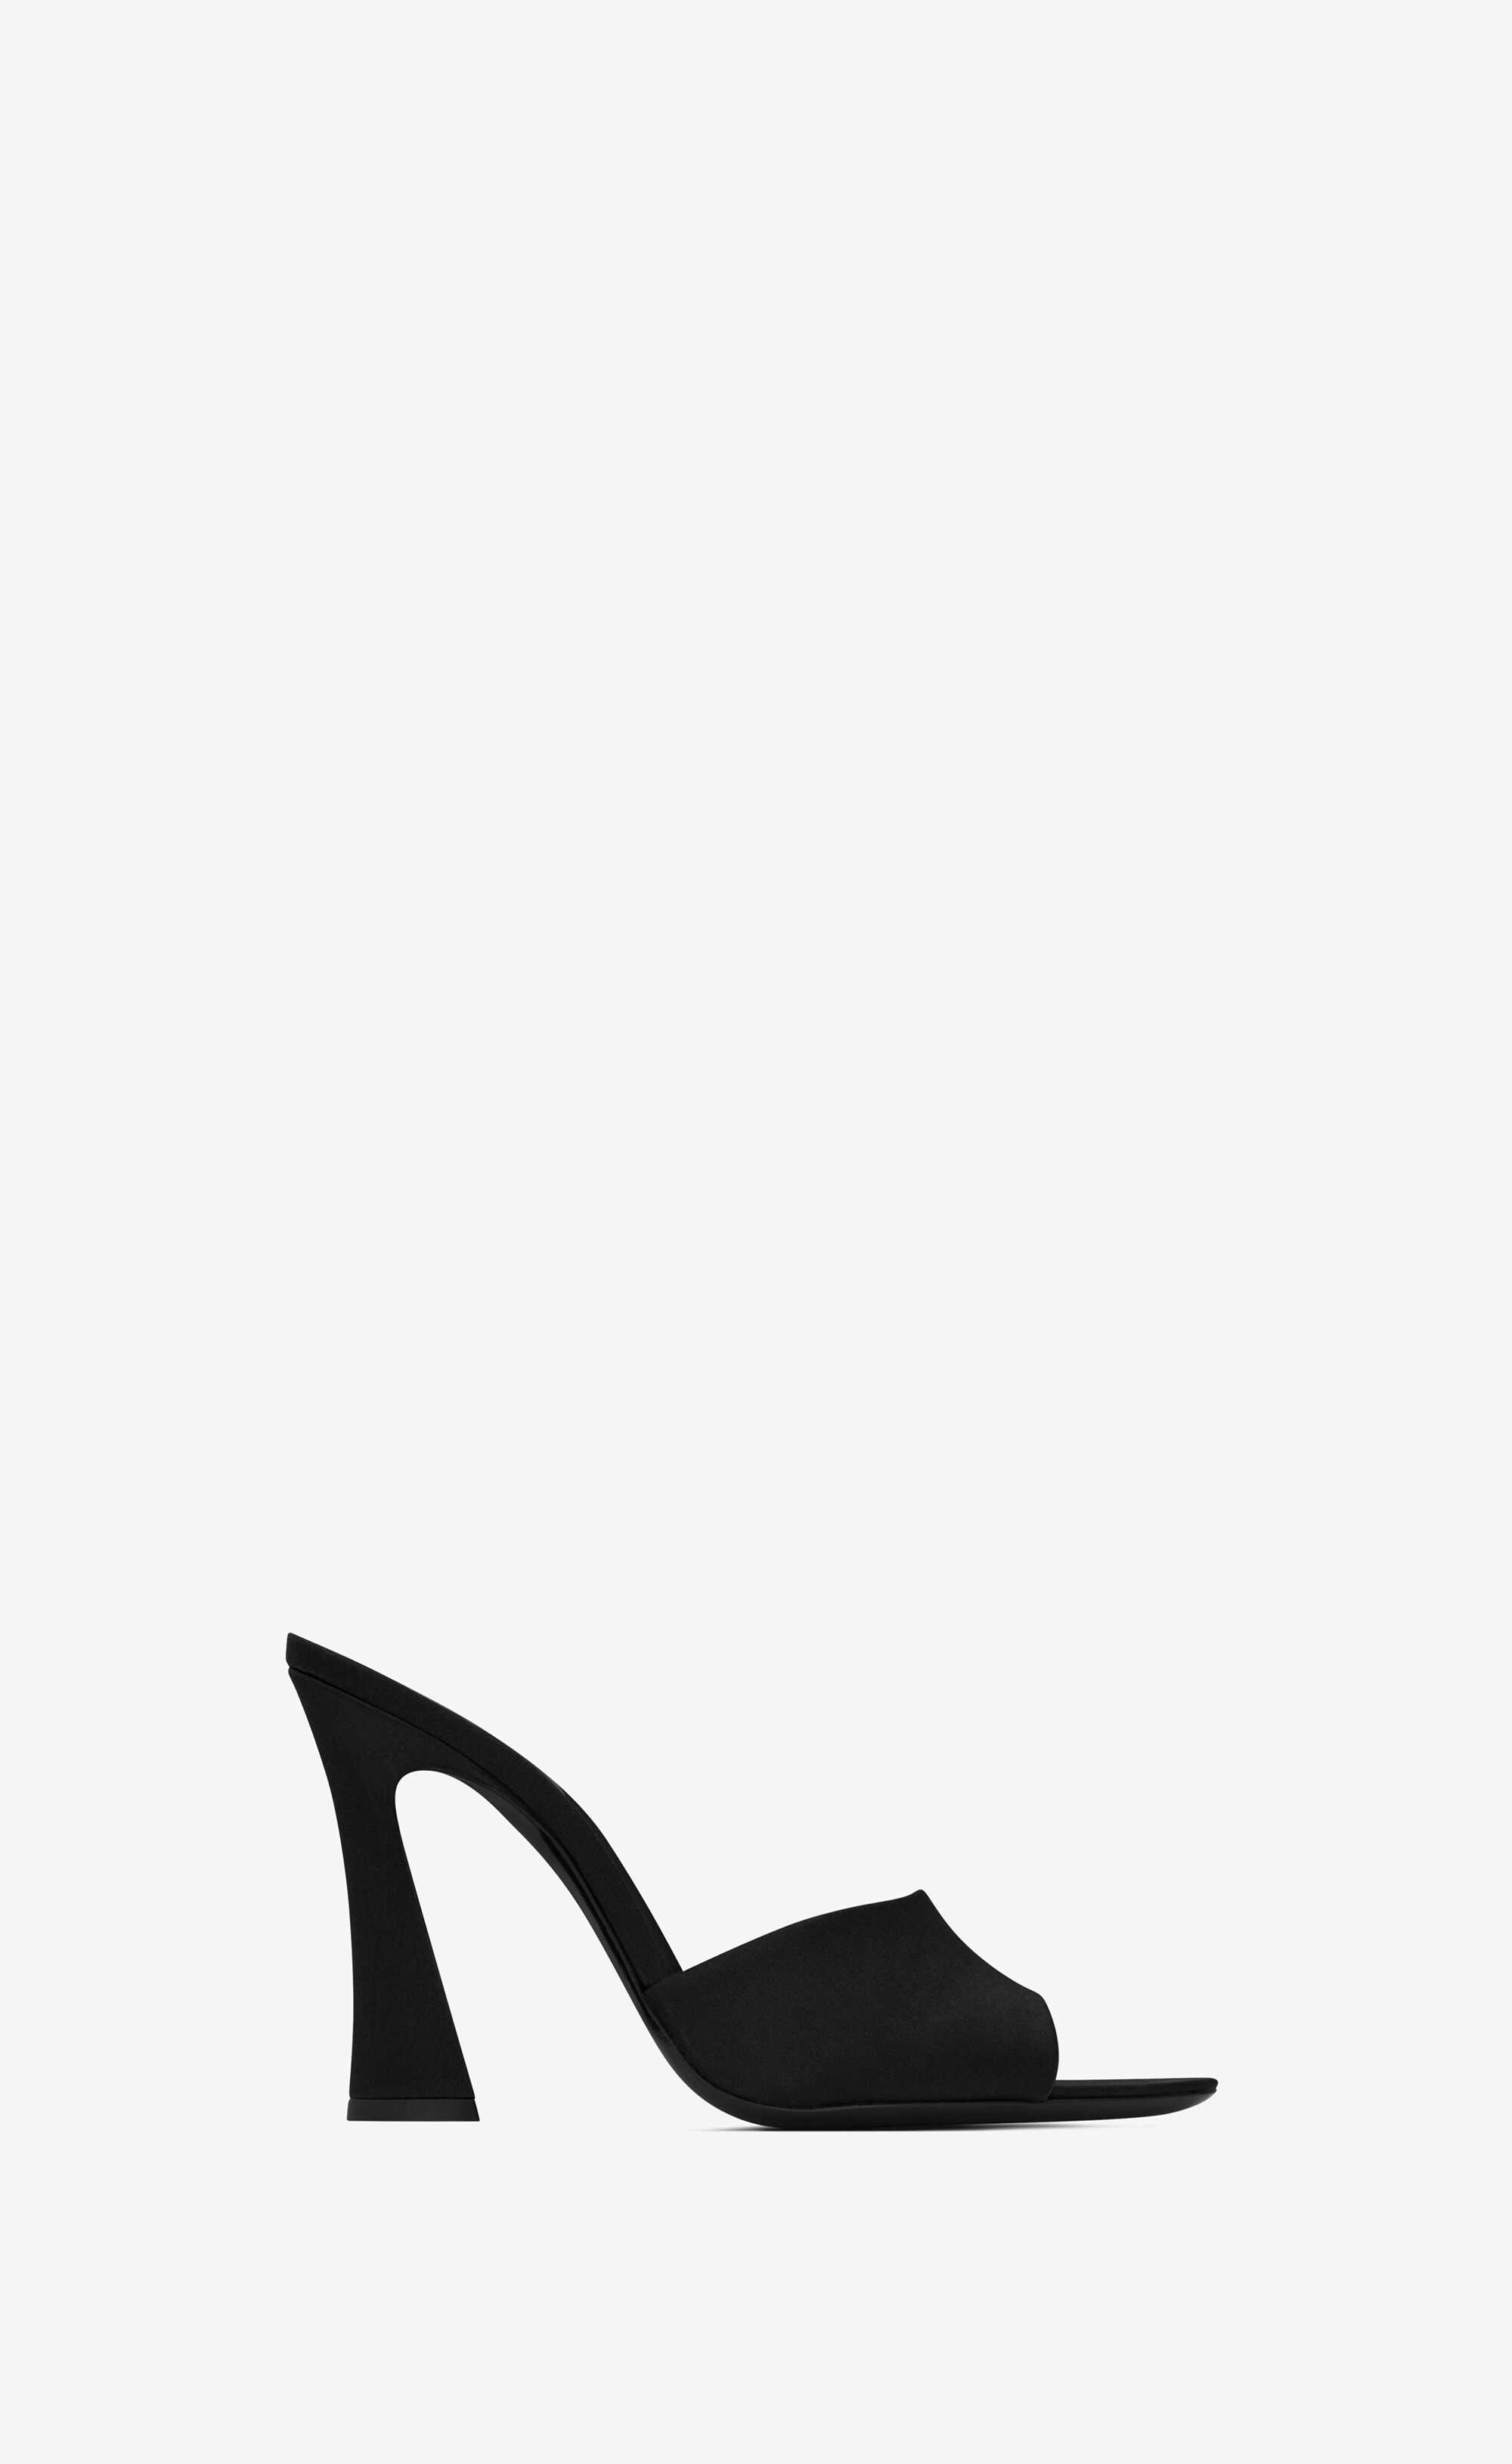 suite heeled mules in crepe satin - 1